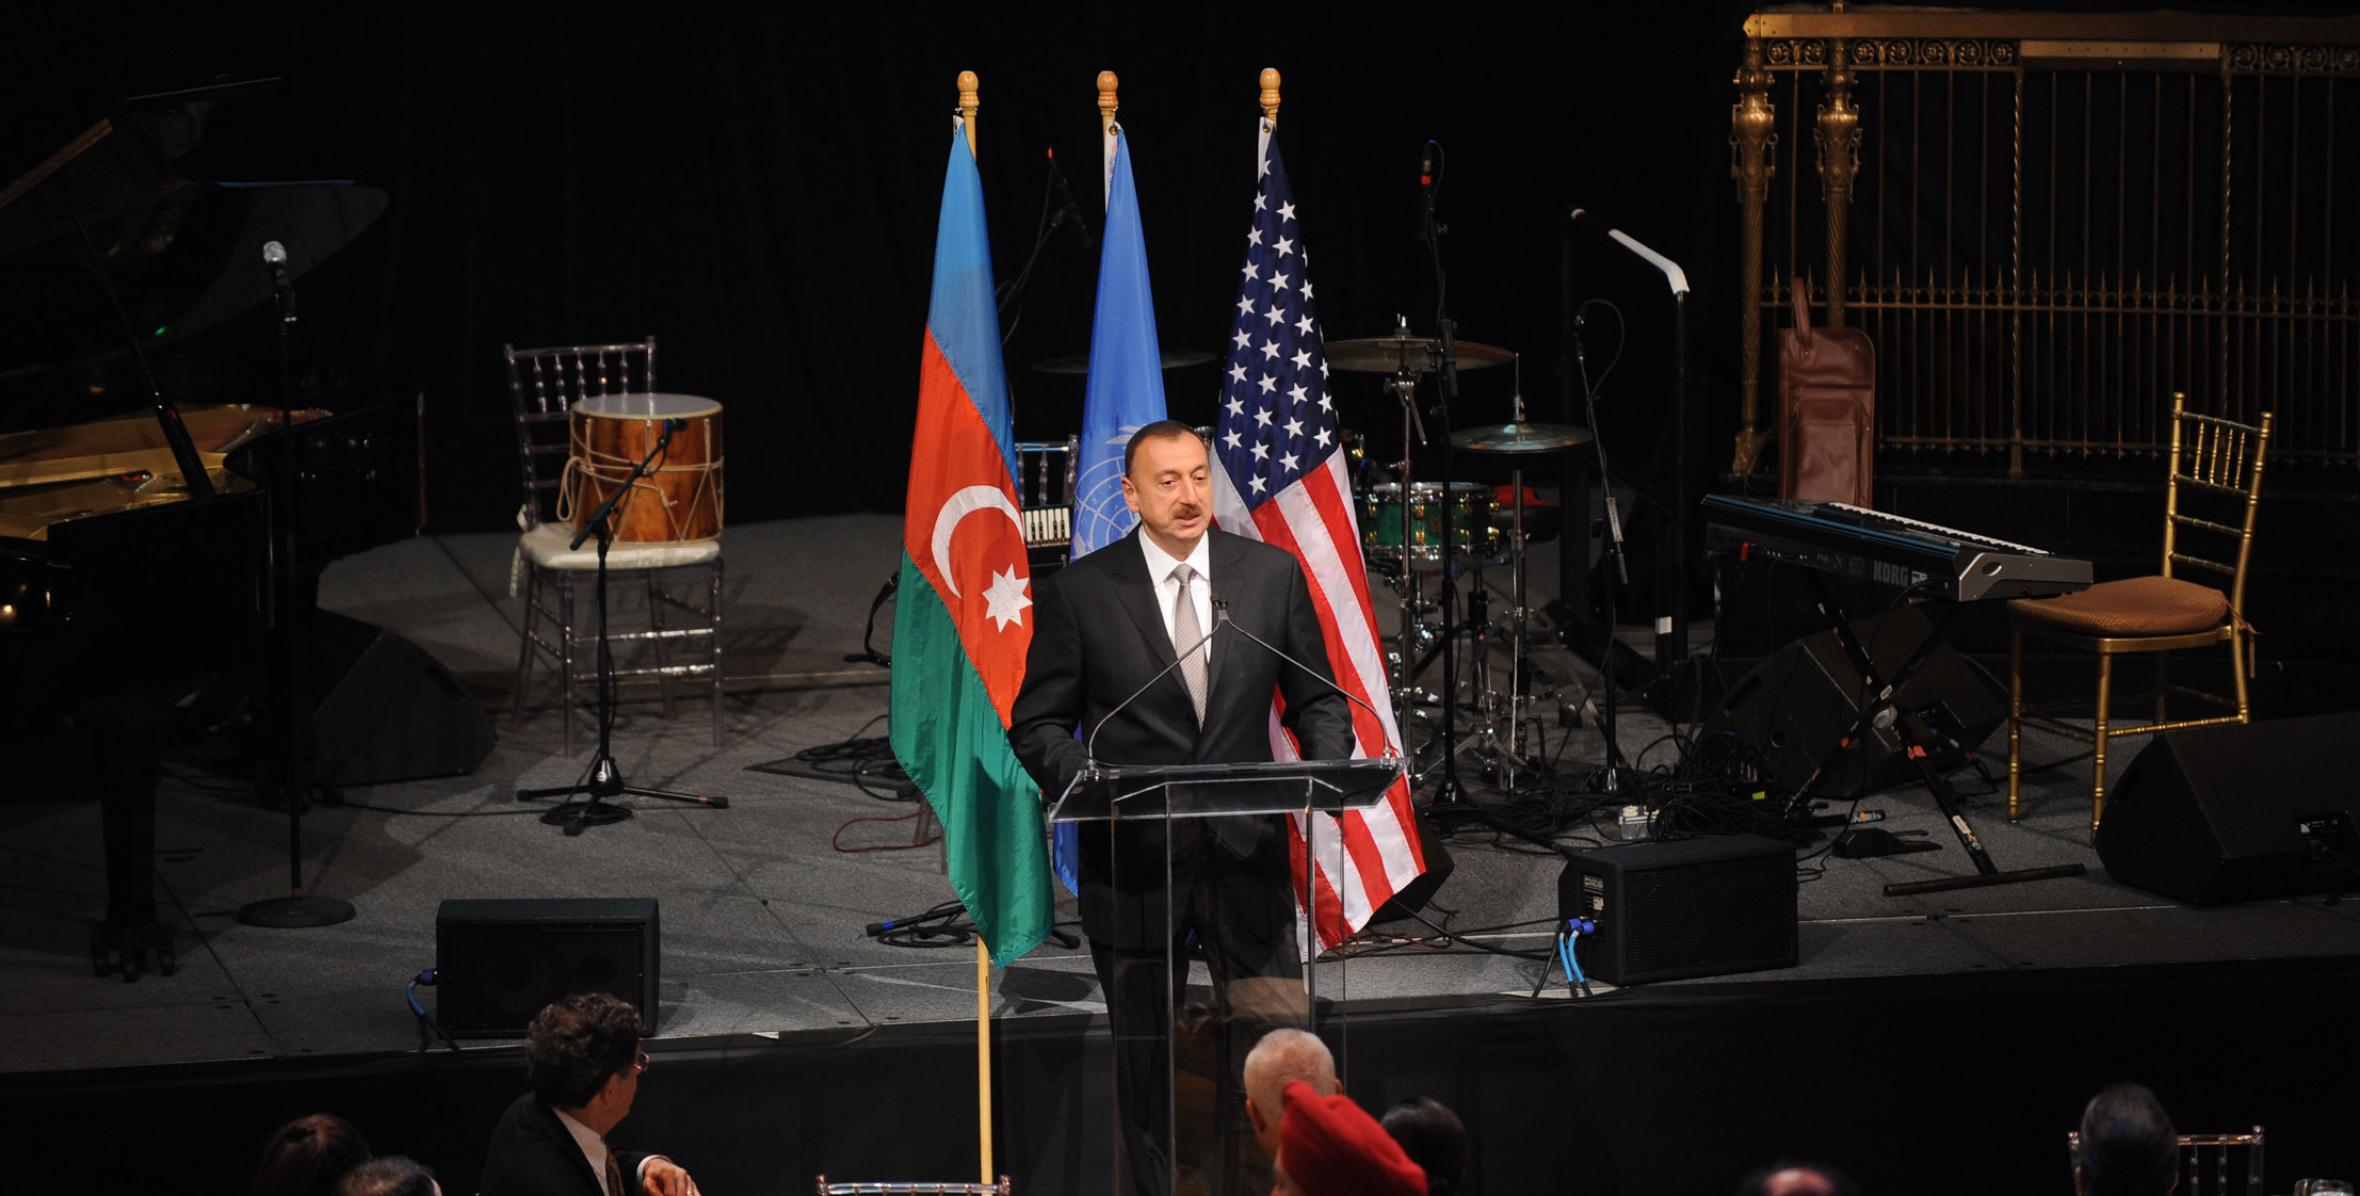 Reception on the occasion of the 20th anniversary of membership of the Republic of Azerbaijan in the United Nations has been held in New York